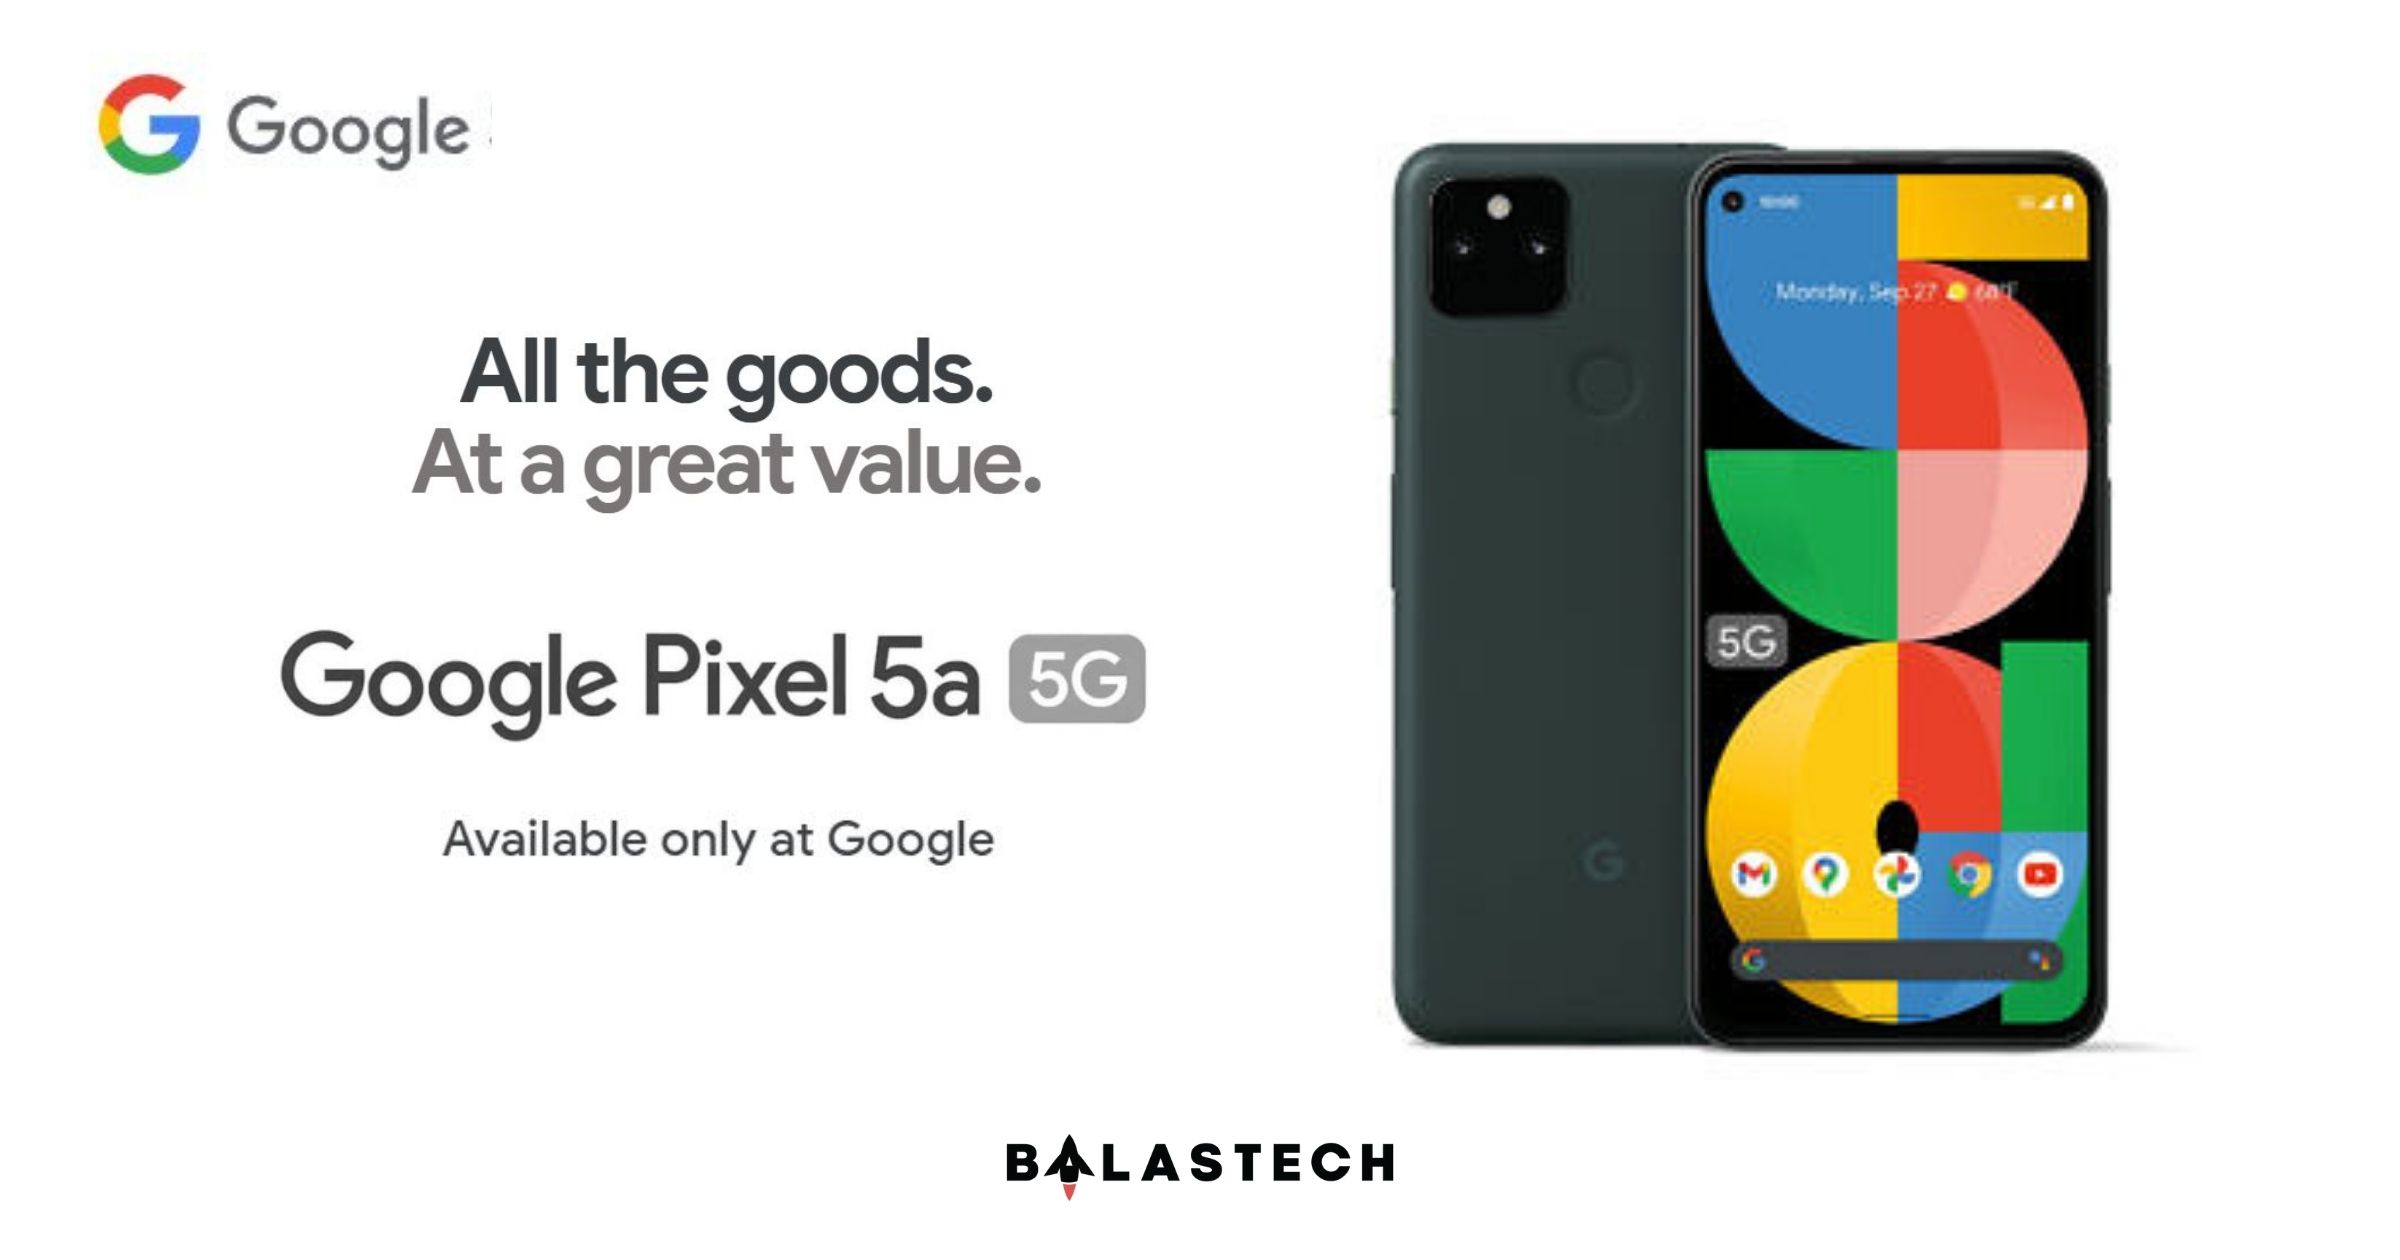 Google Pixel 5a with 5G is now official